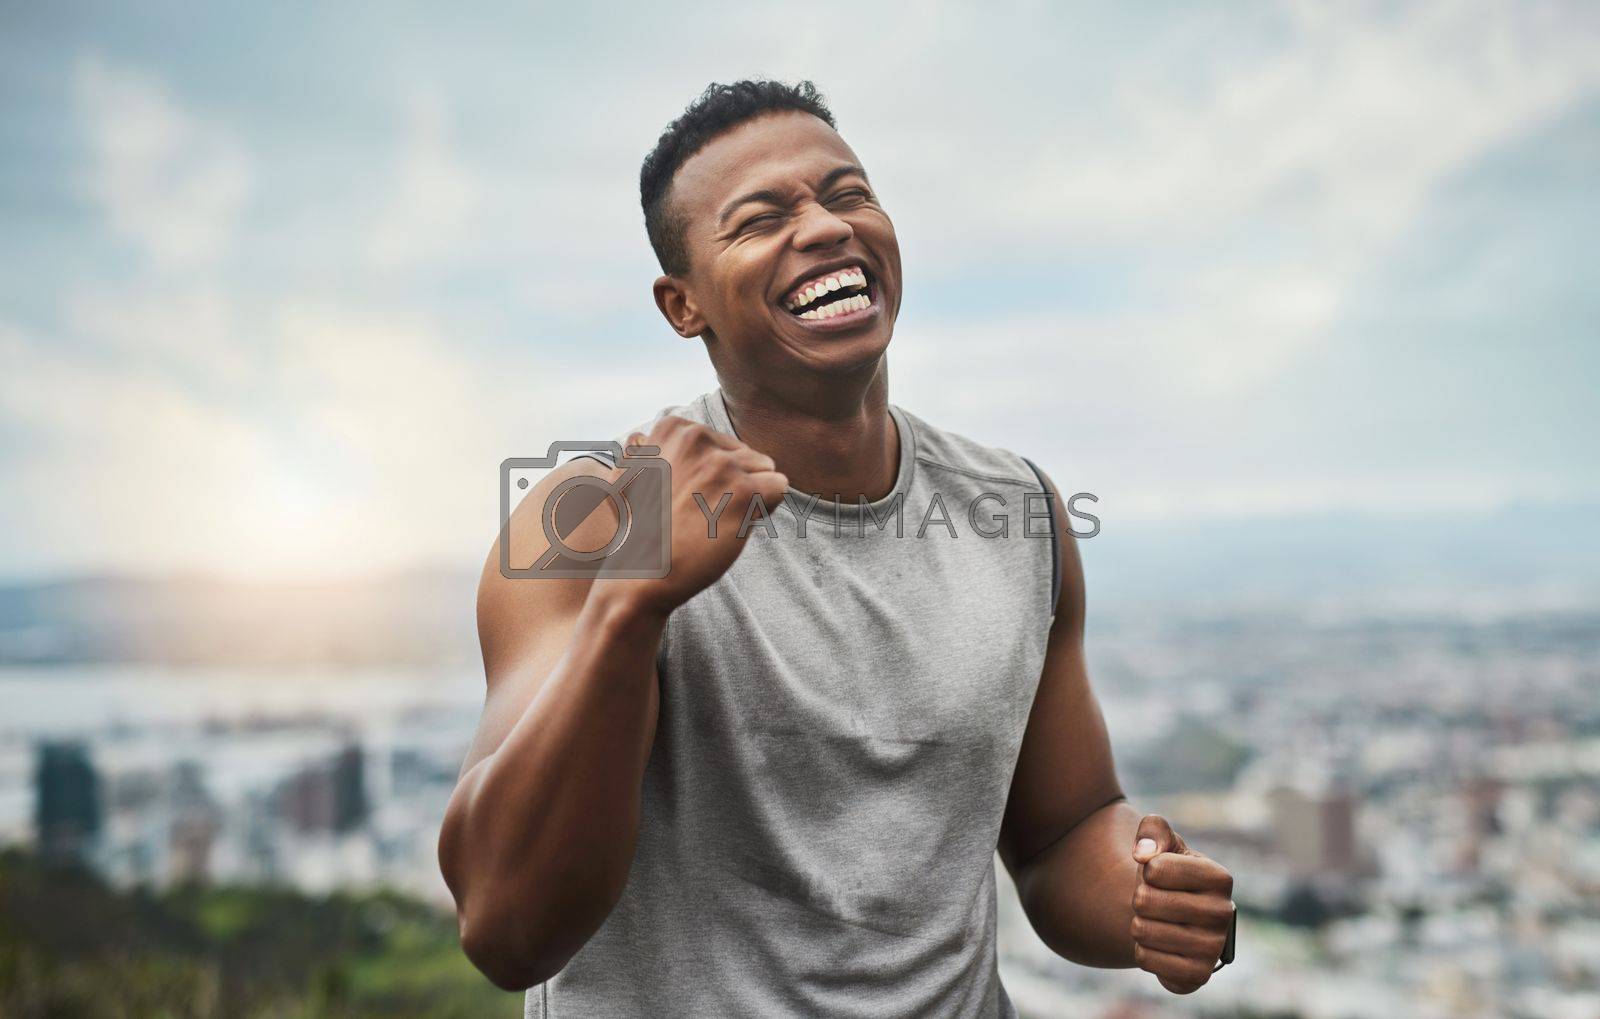 Royalty free image of Hes impressed with himself. a handsome young sportsman cheering in celebration outside. by YuriArcurs